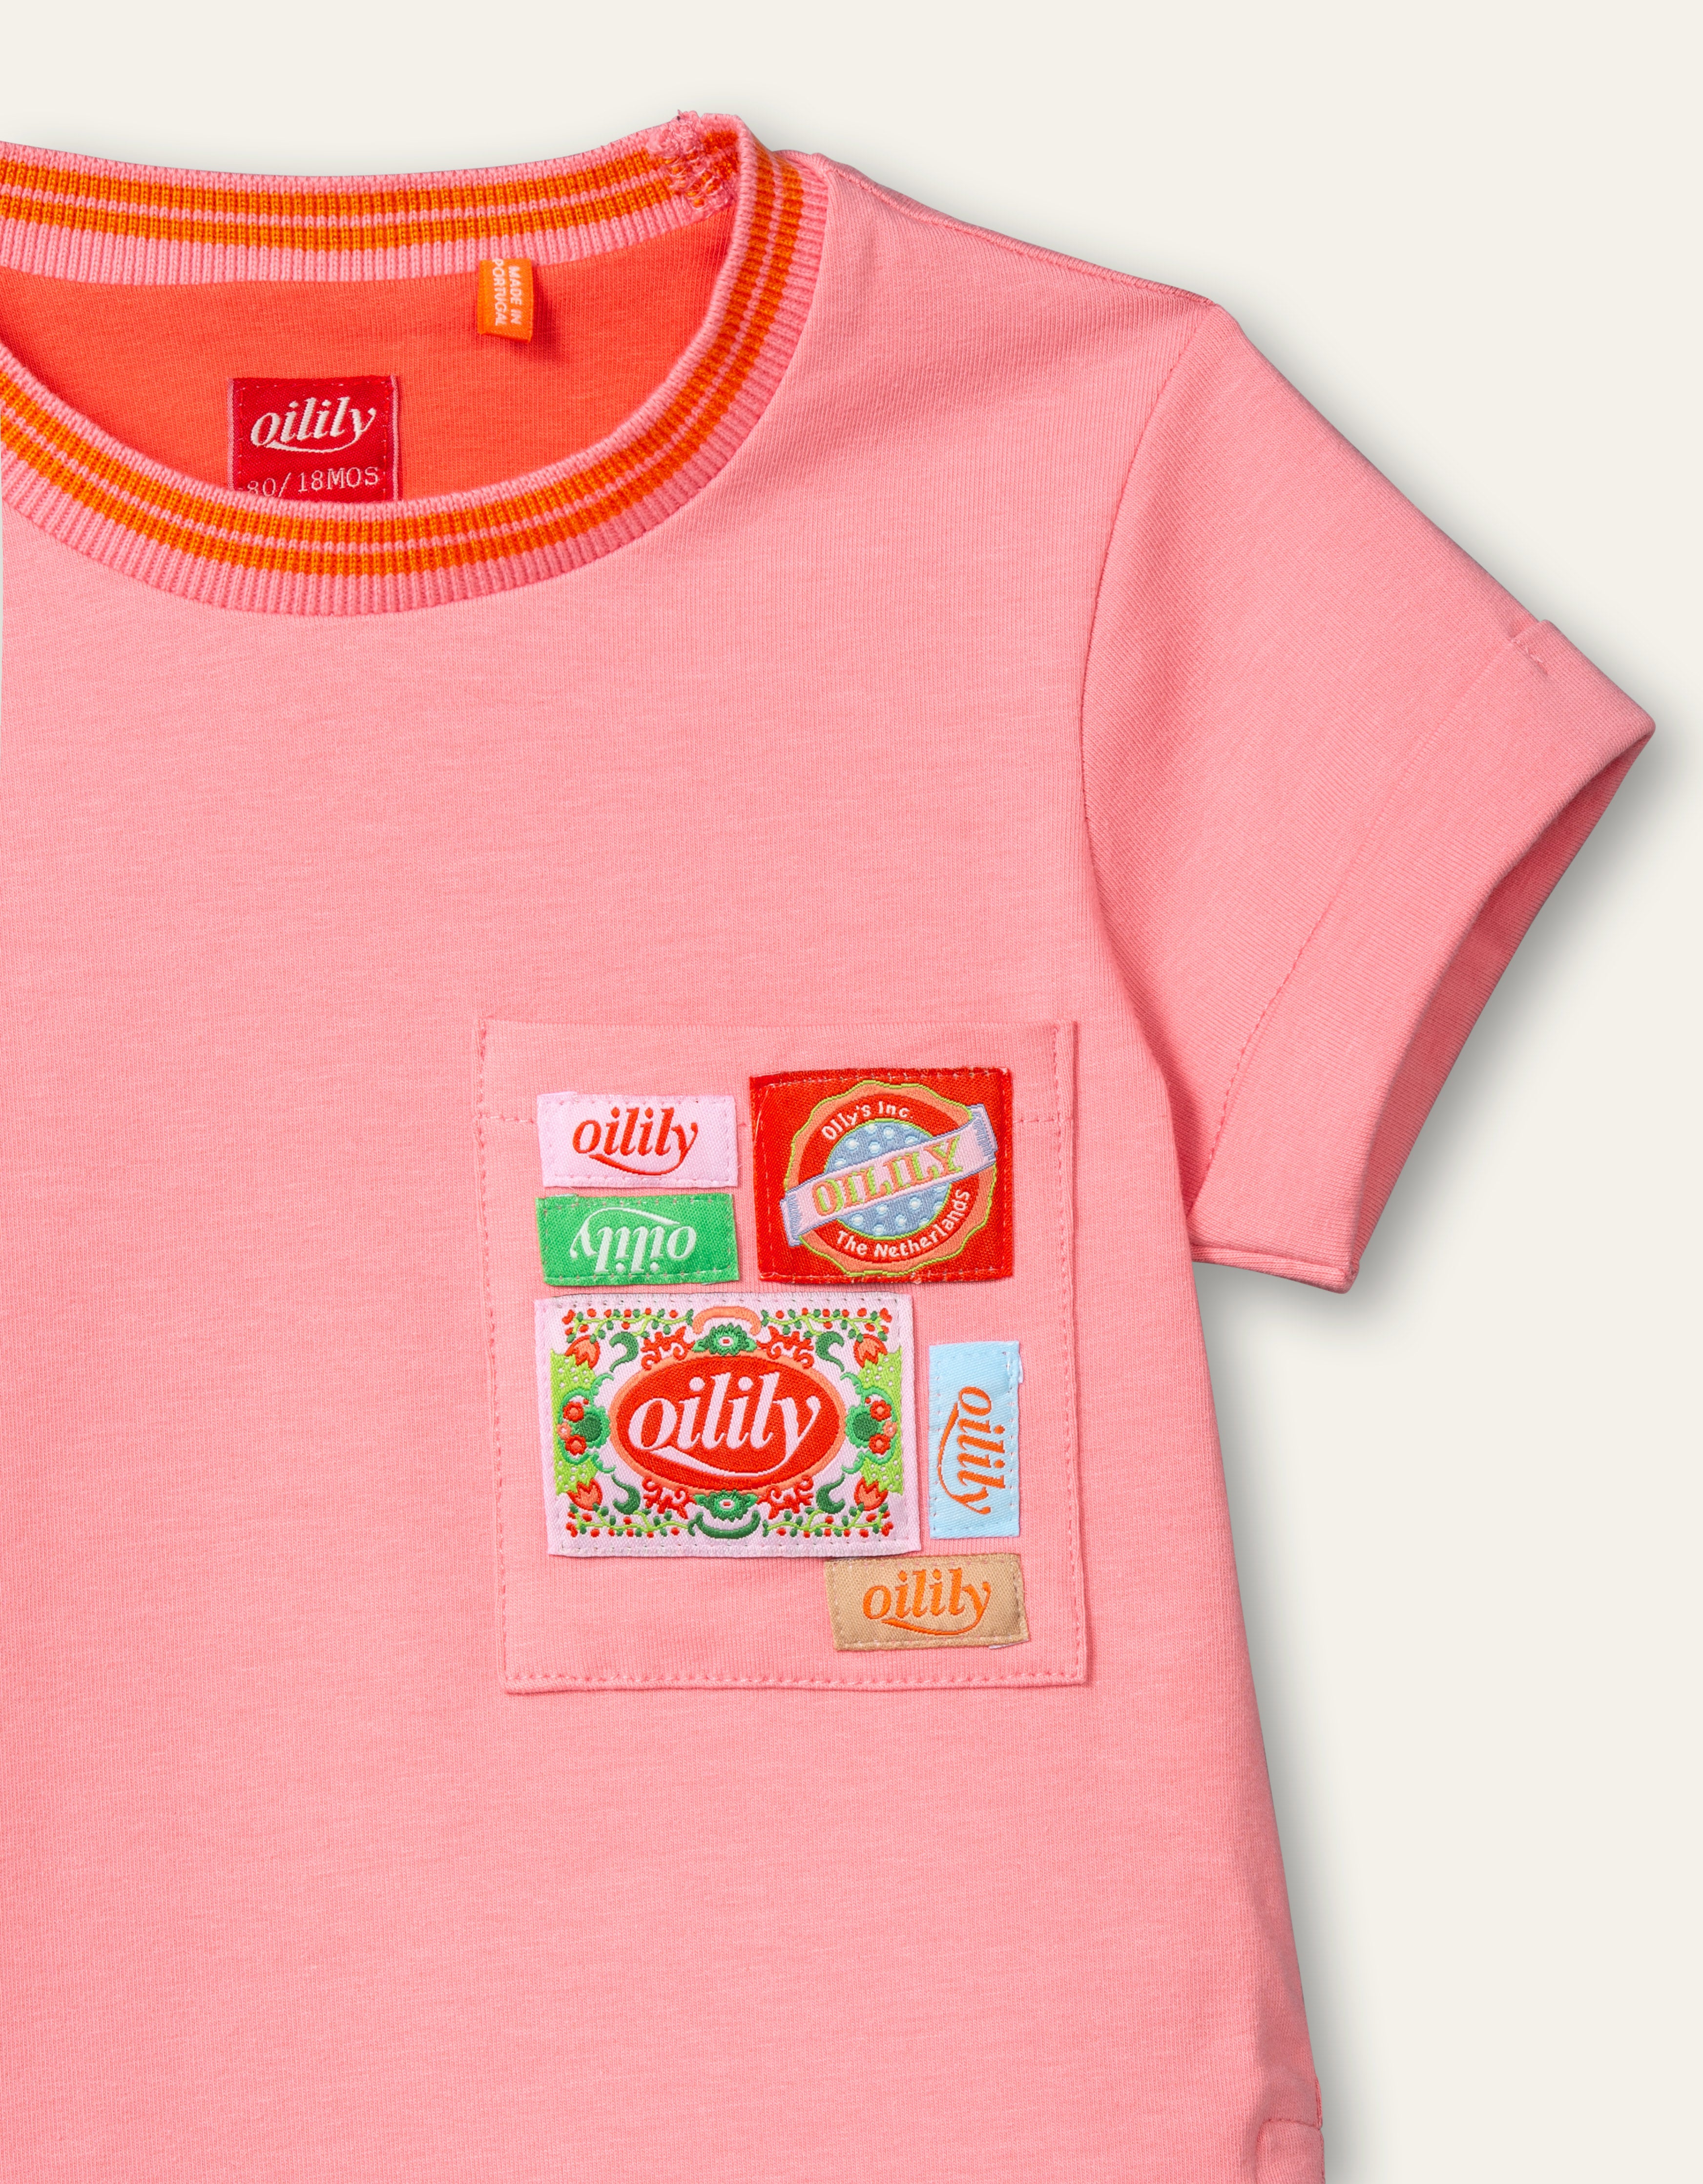 Oilily Terrific T-shirt 32 geranium pink with woven labels pocket